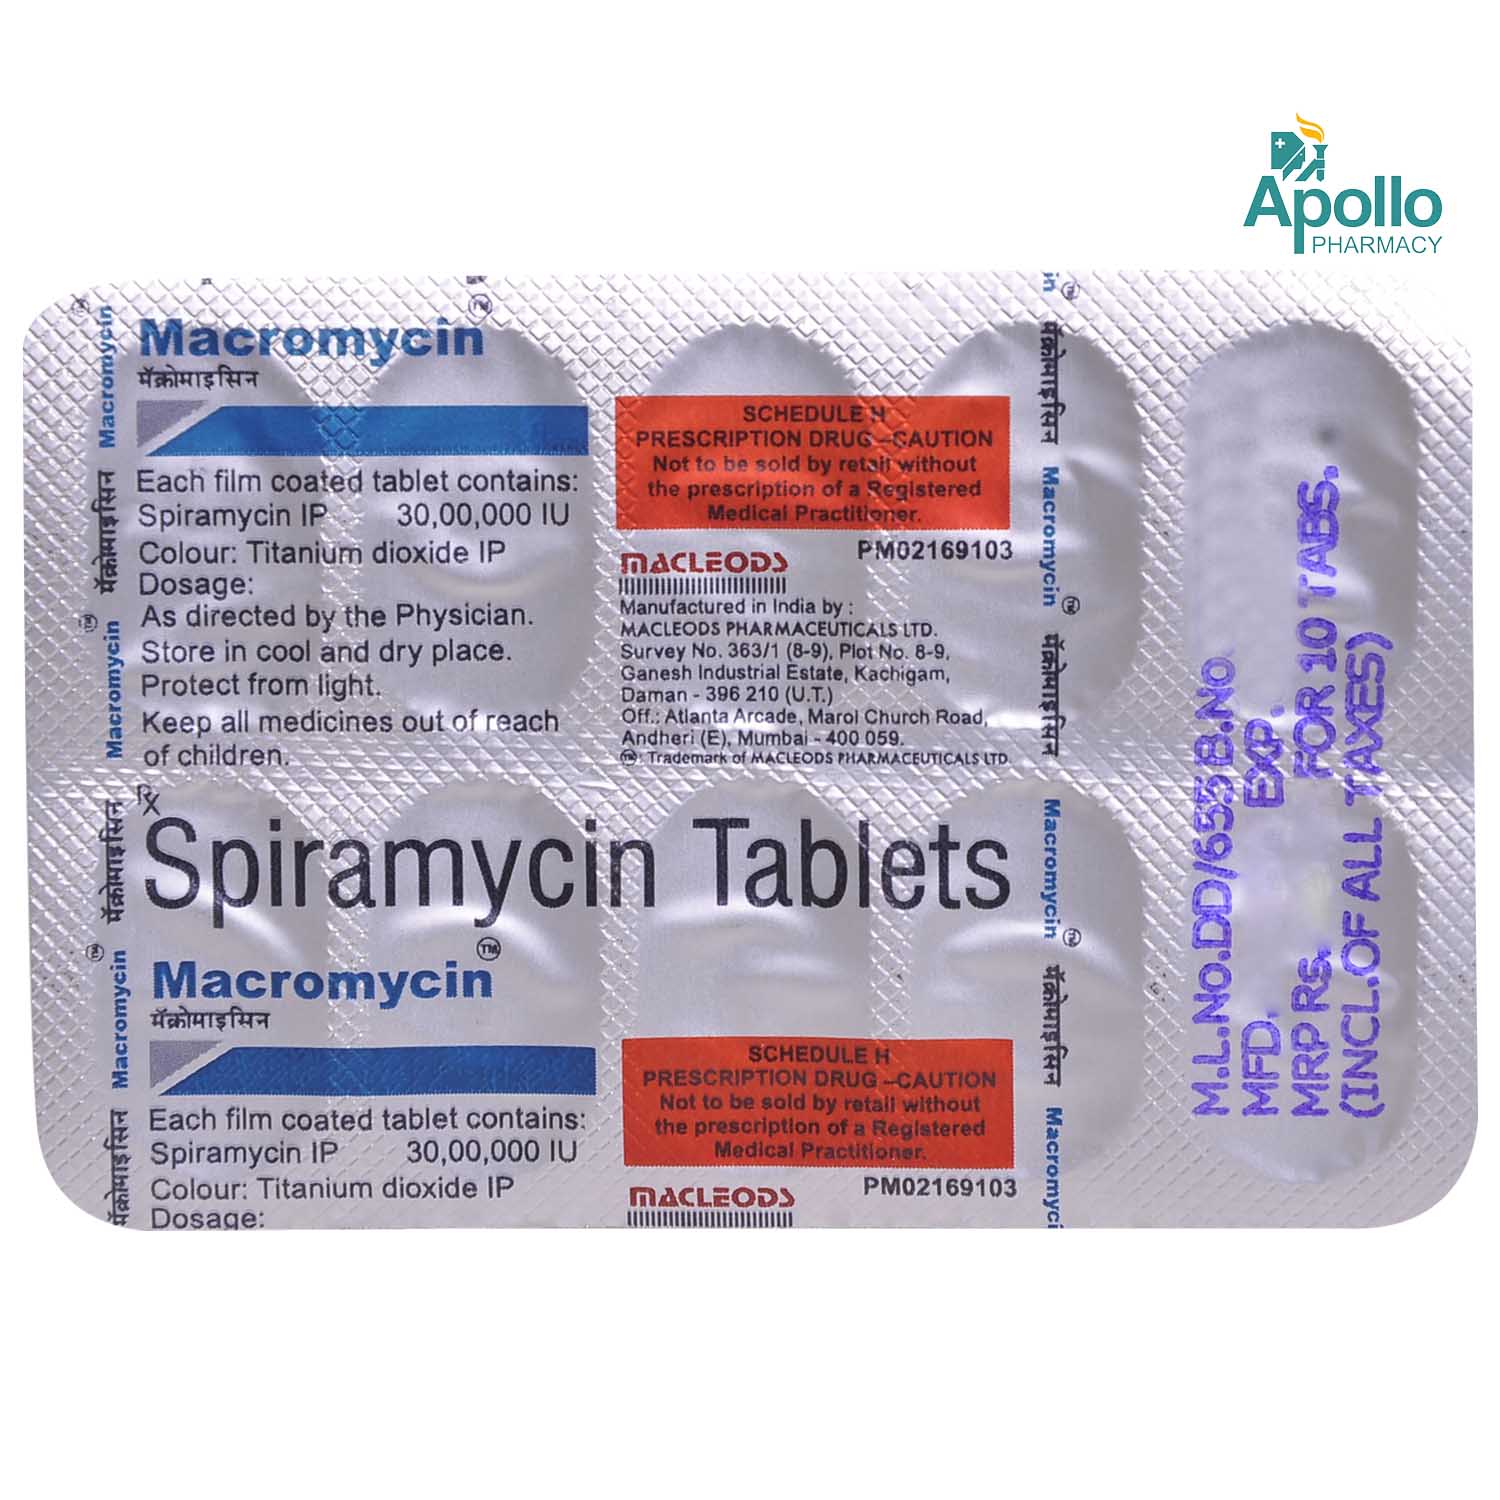 Macromycin Tablet Price Uses Side Effects Composition Apollo Pharmacy